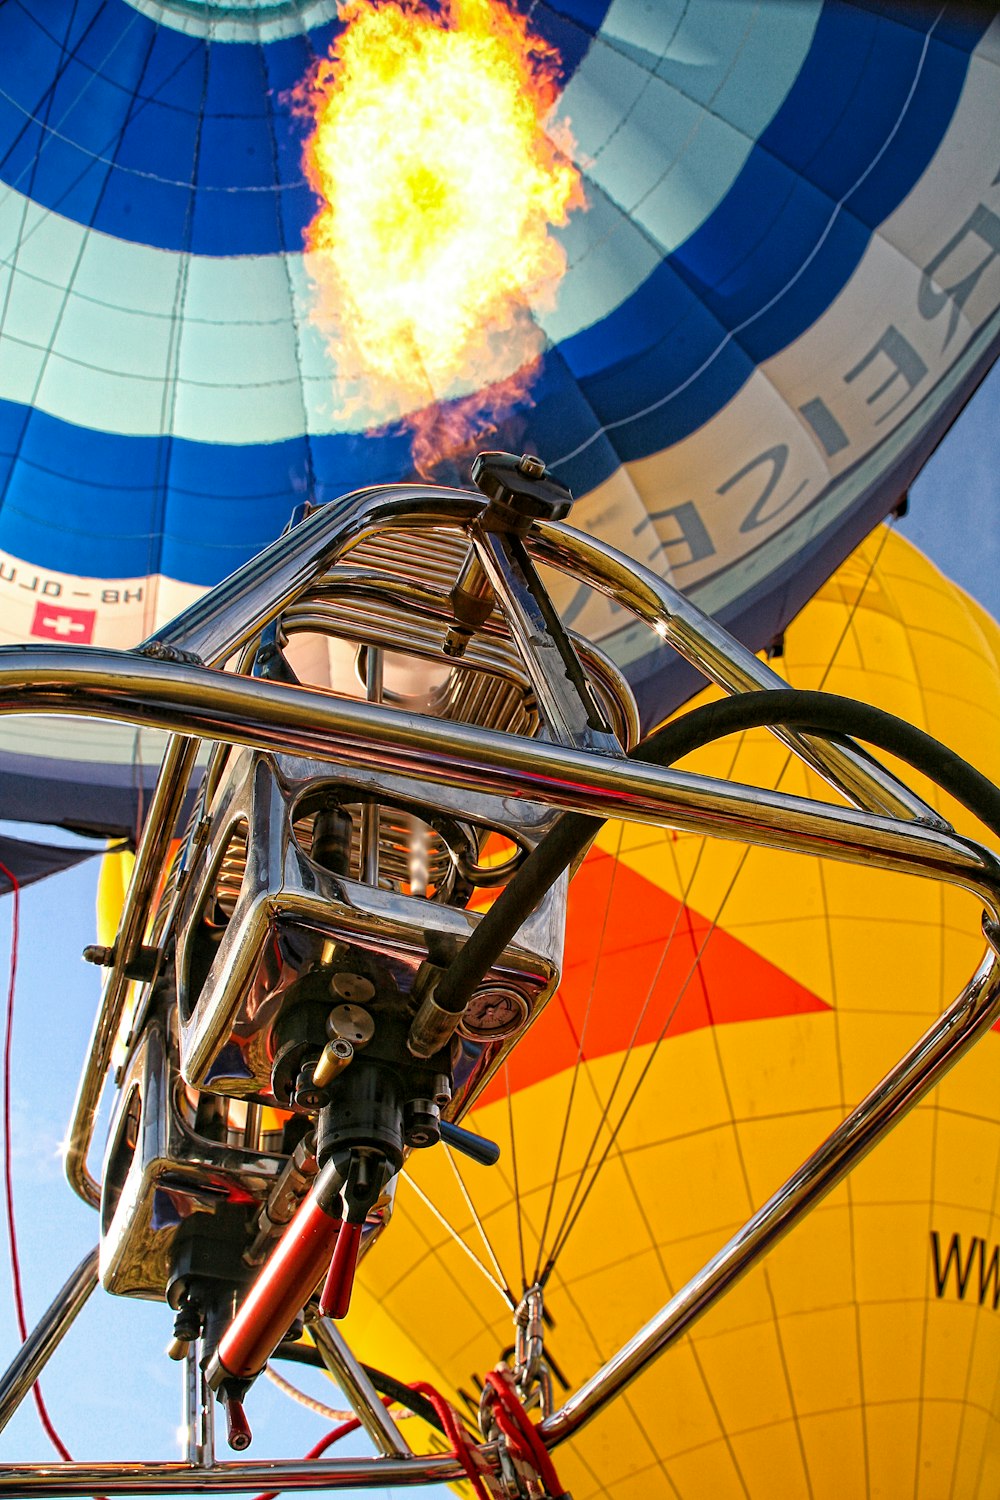 stainless steel hot air balloon engine